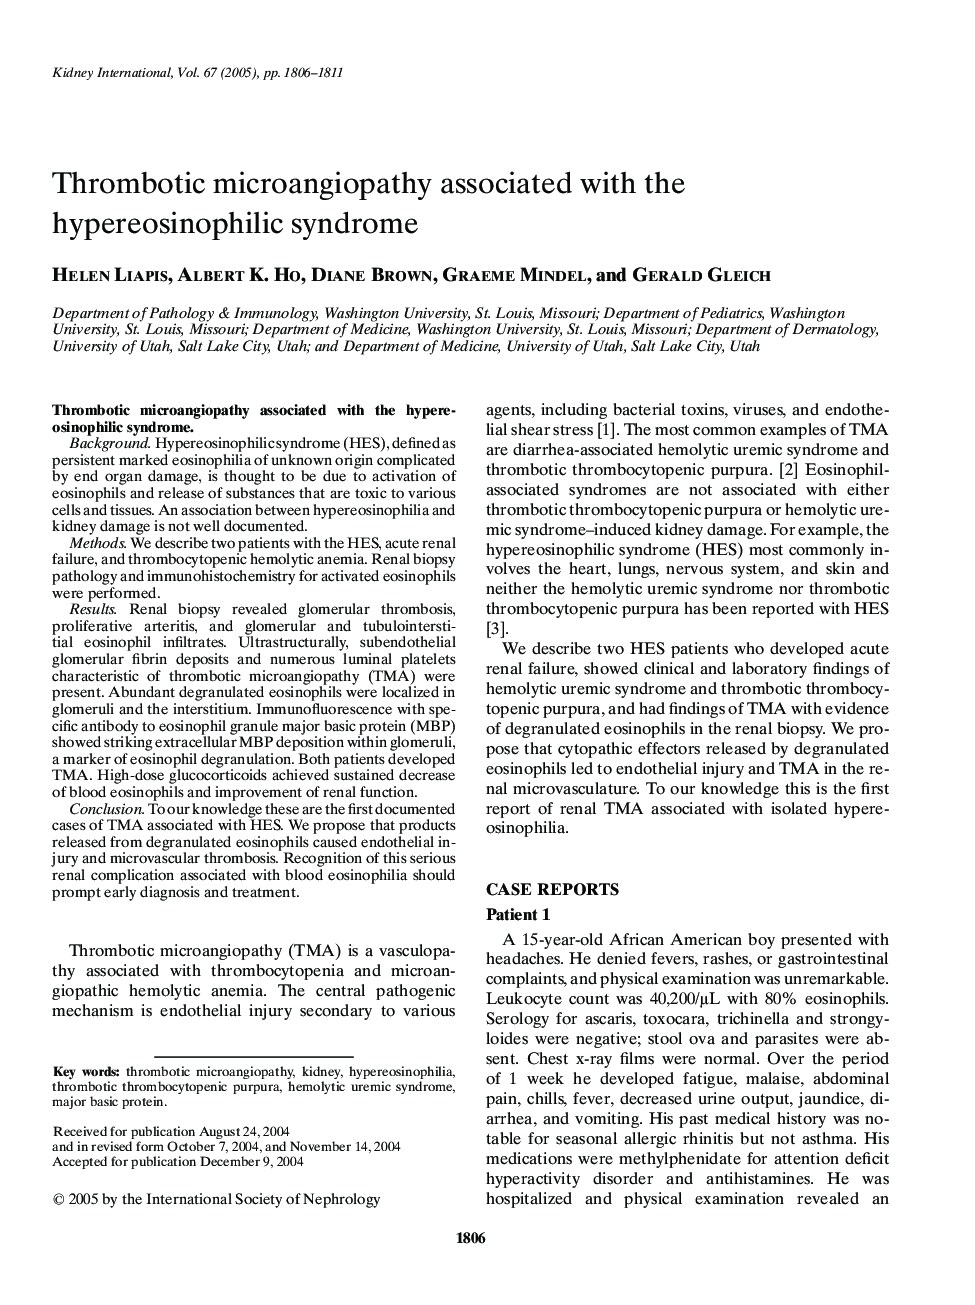 Thrombotic microangiopathy associated with the hypereosinophilic syndrome